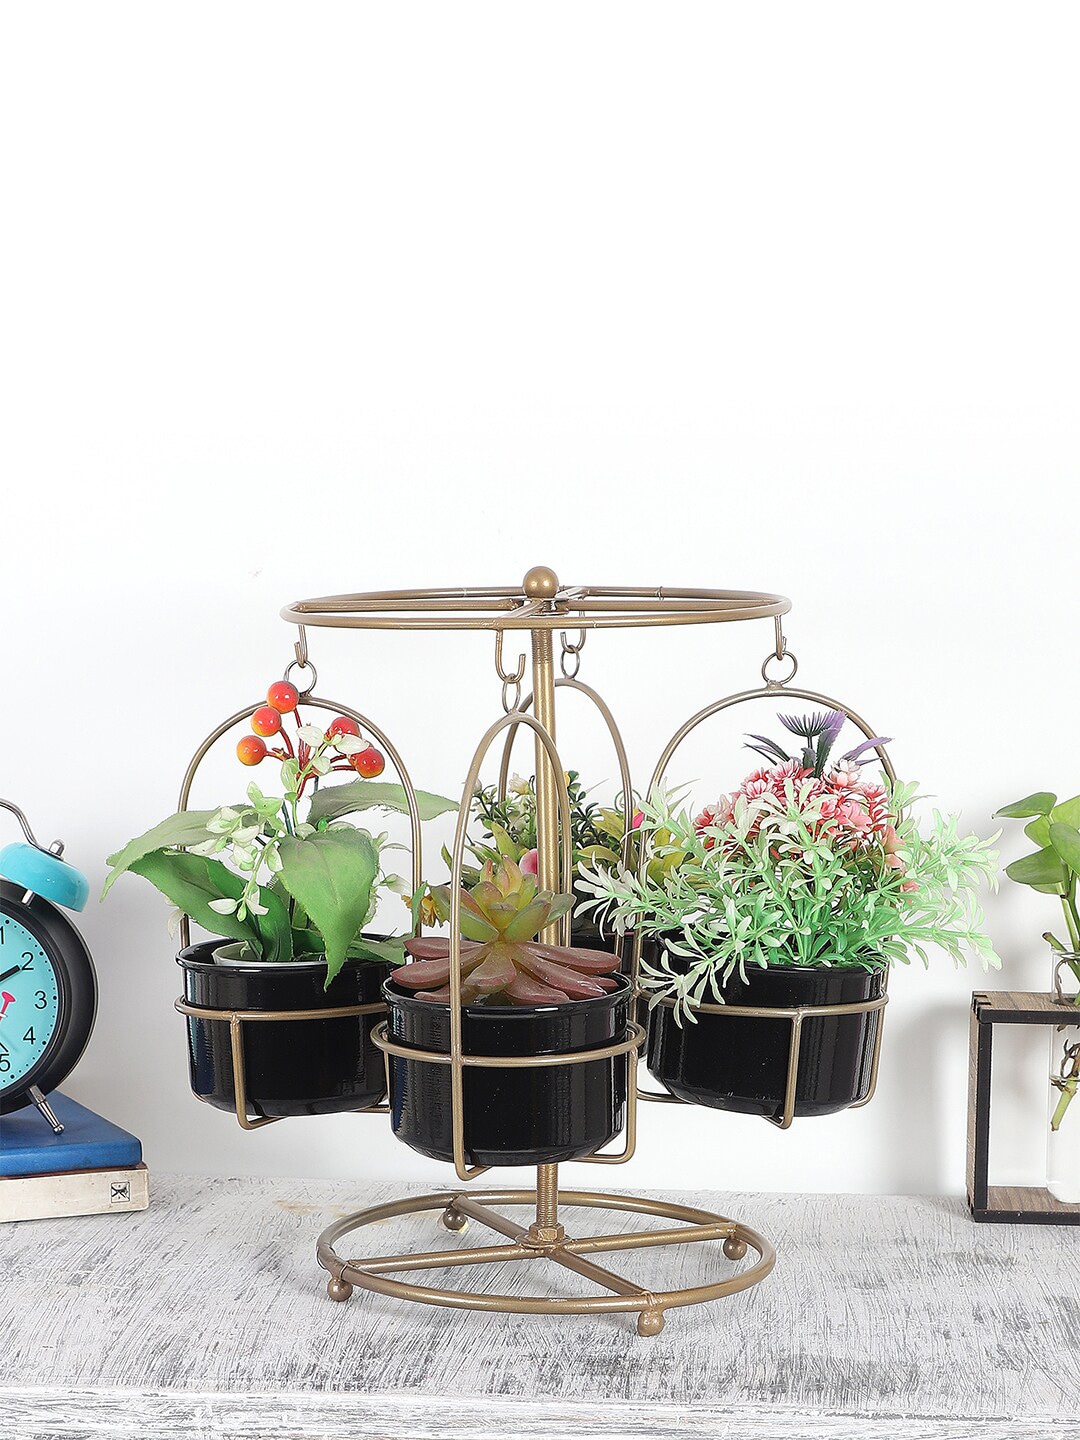 Amaya Decors Set Of 4 Gold-Toned & Black Solid Revolving Merry Go Round Planters With Stand Price in India